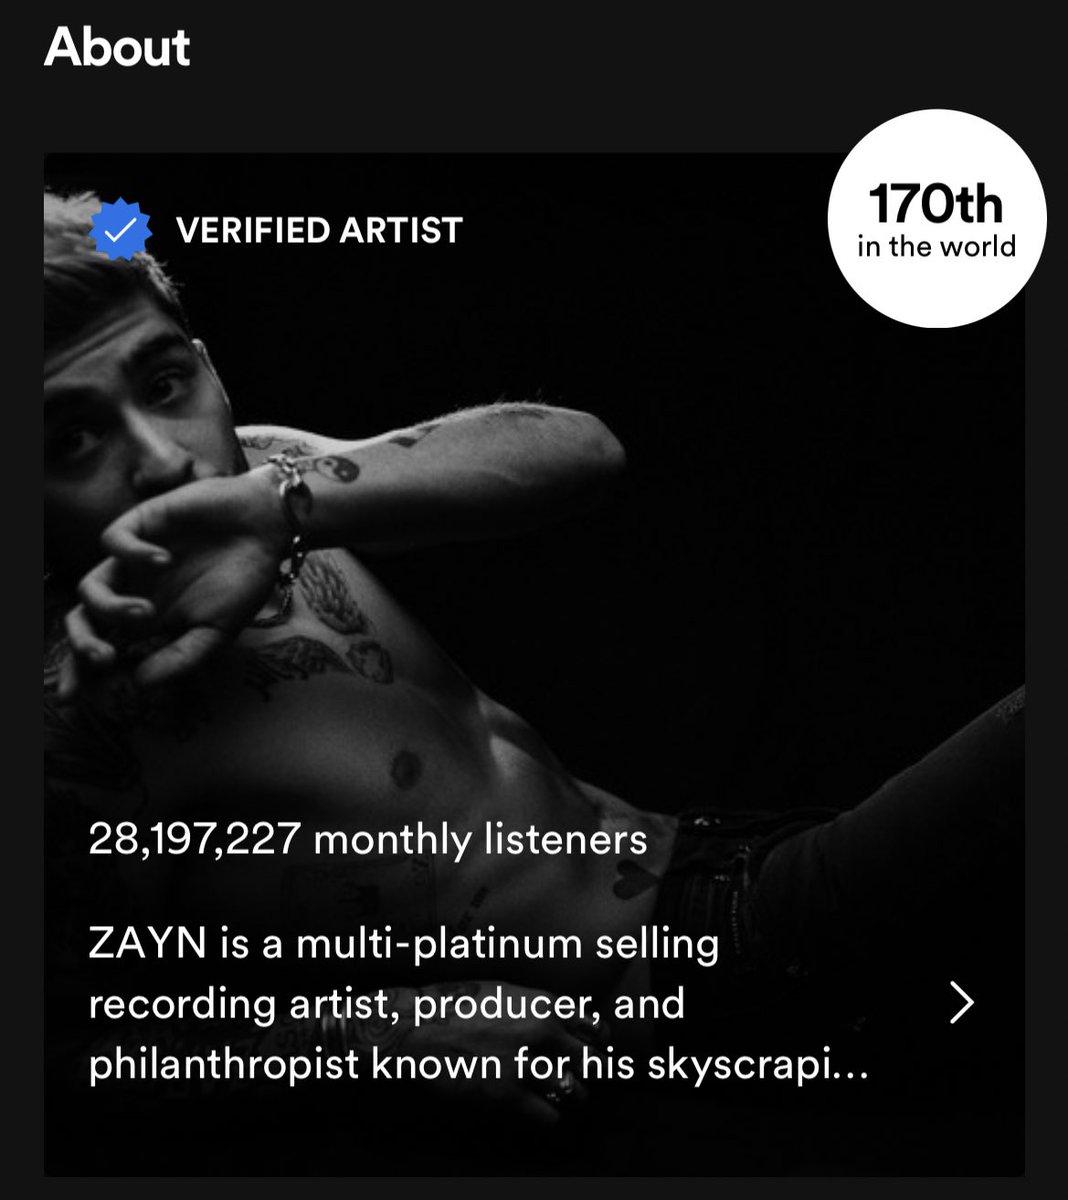 Guys ZAYN now is 170th in the world👏🏻